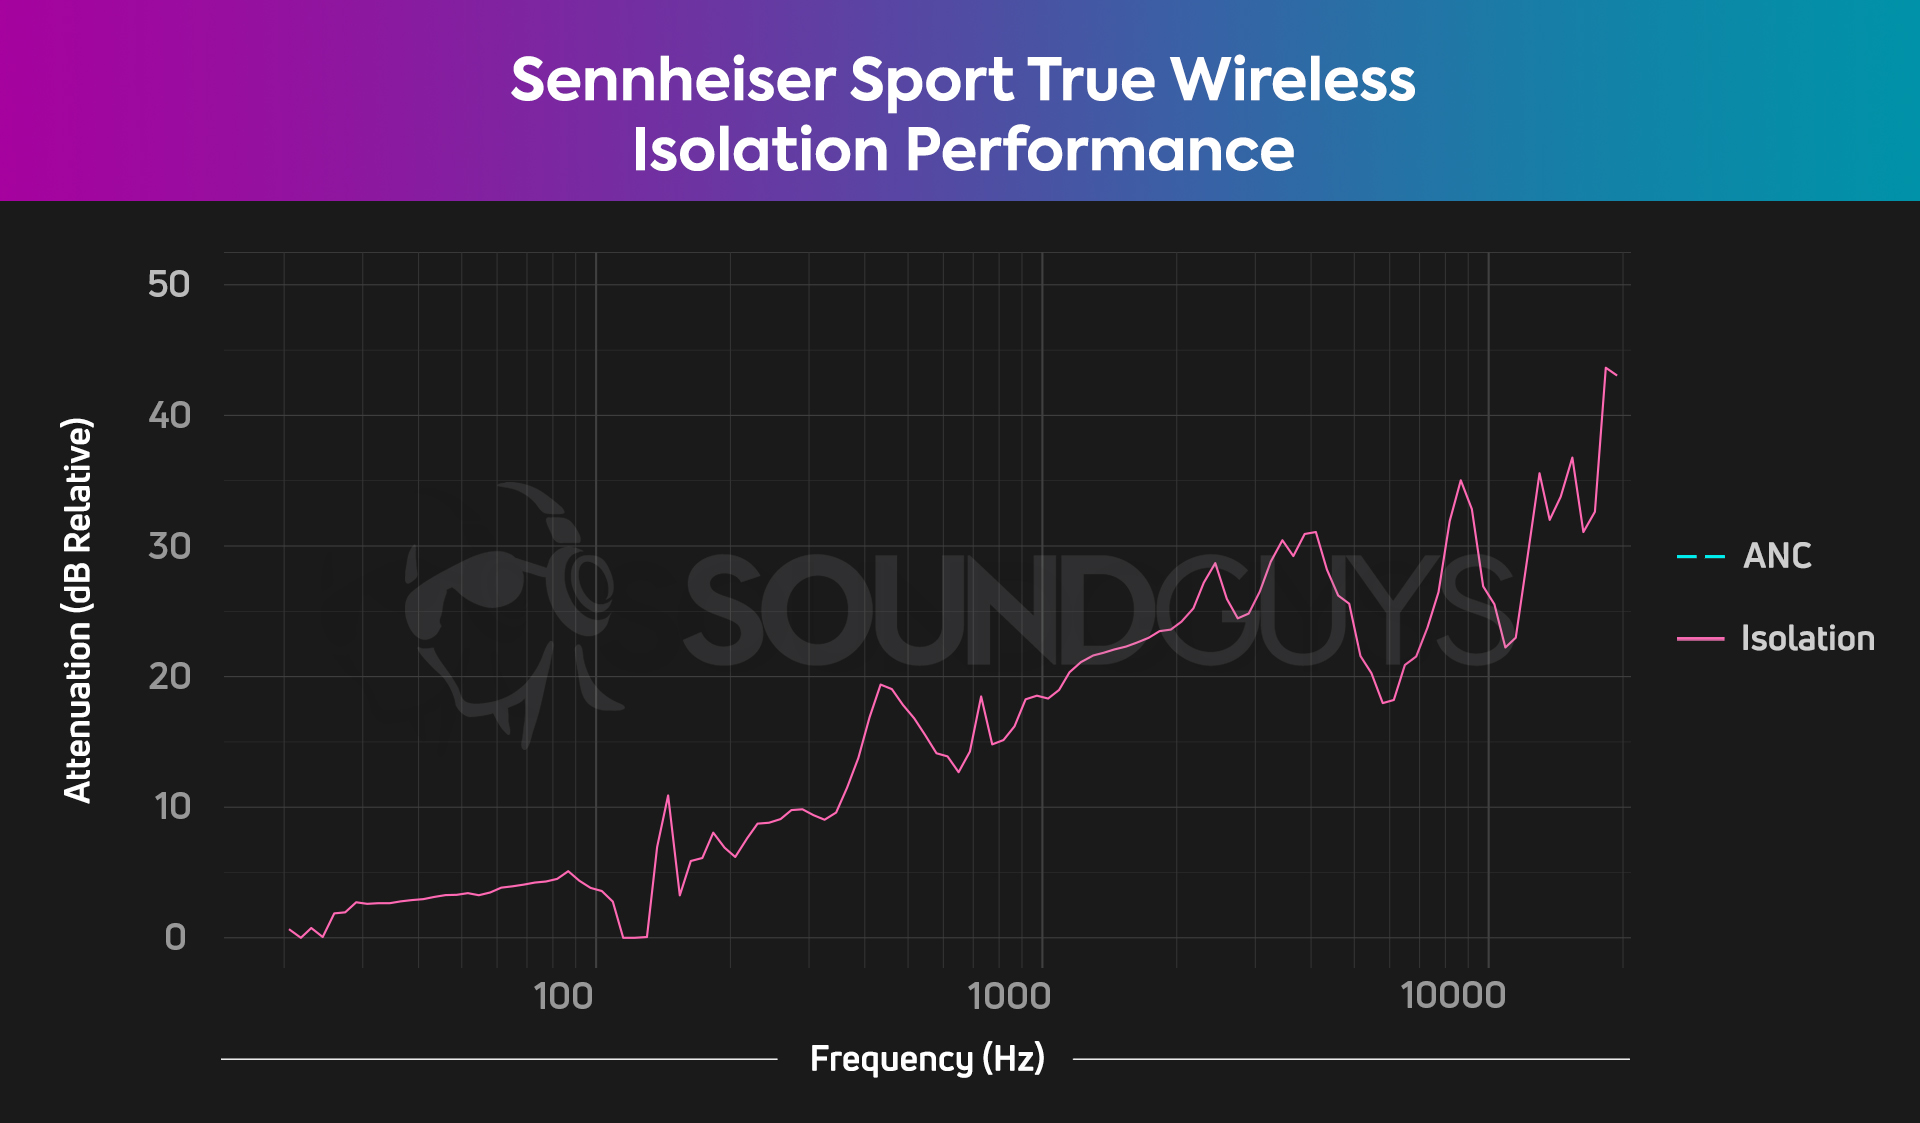 Sennheiser Sport True Wireless isolation chart showing more high frequency noise being attenuated than low frequency noise